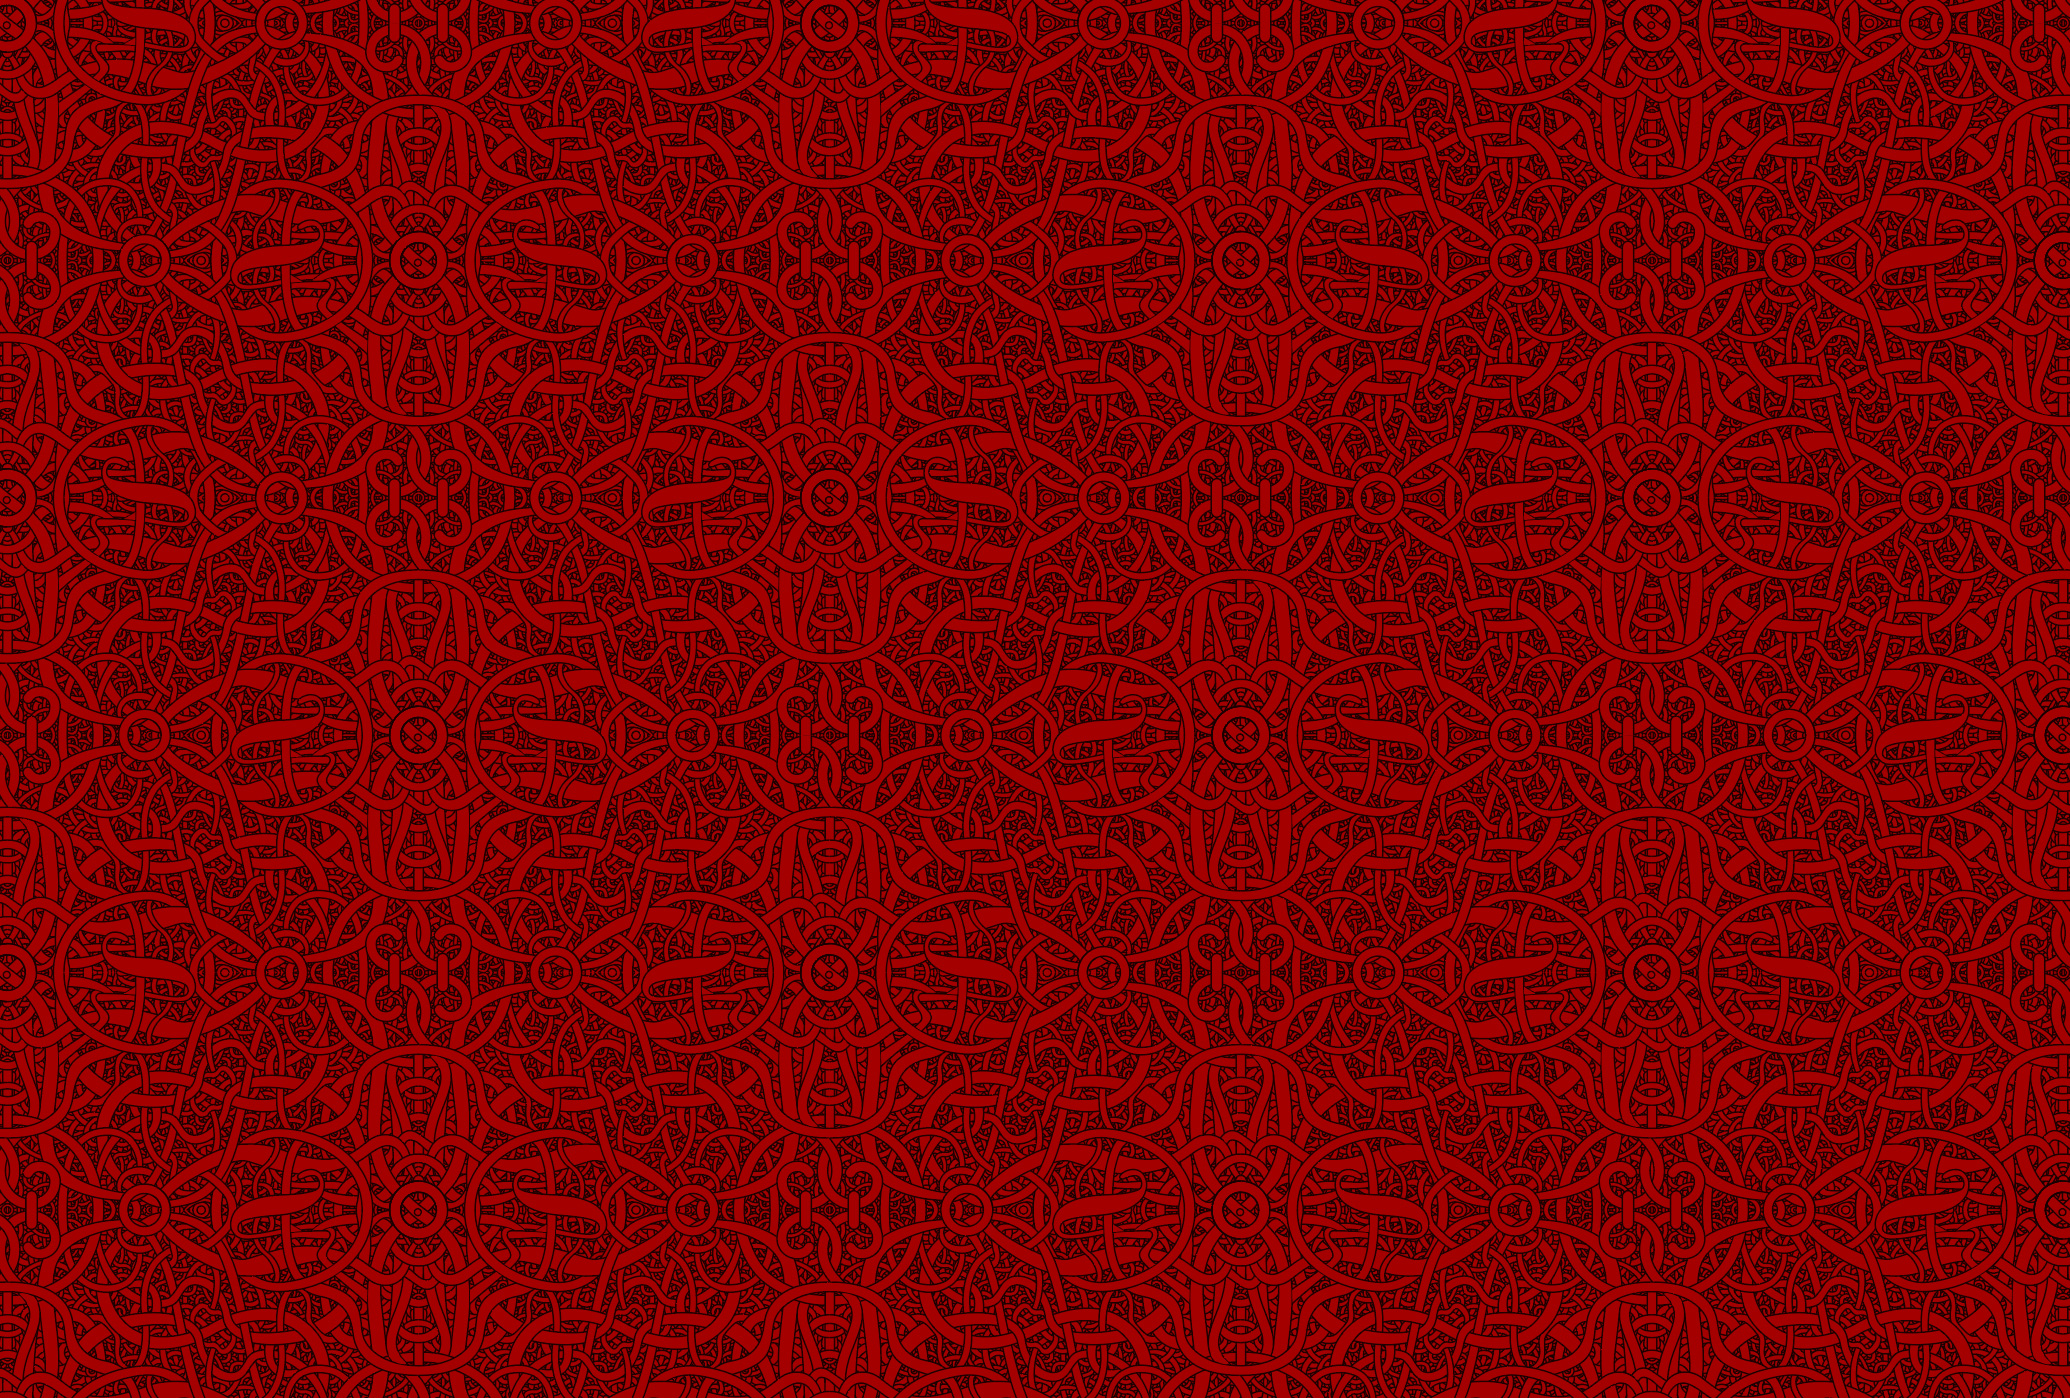 Repeating Pattern in Red